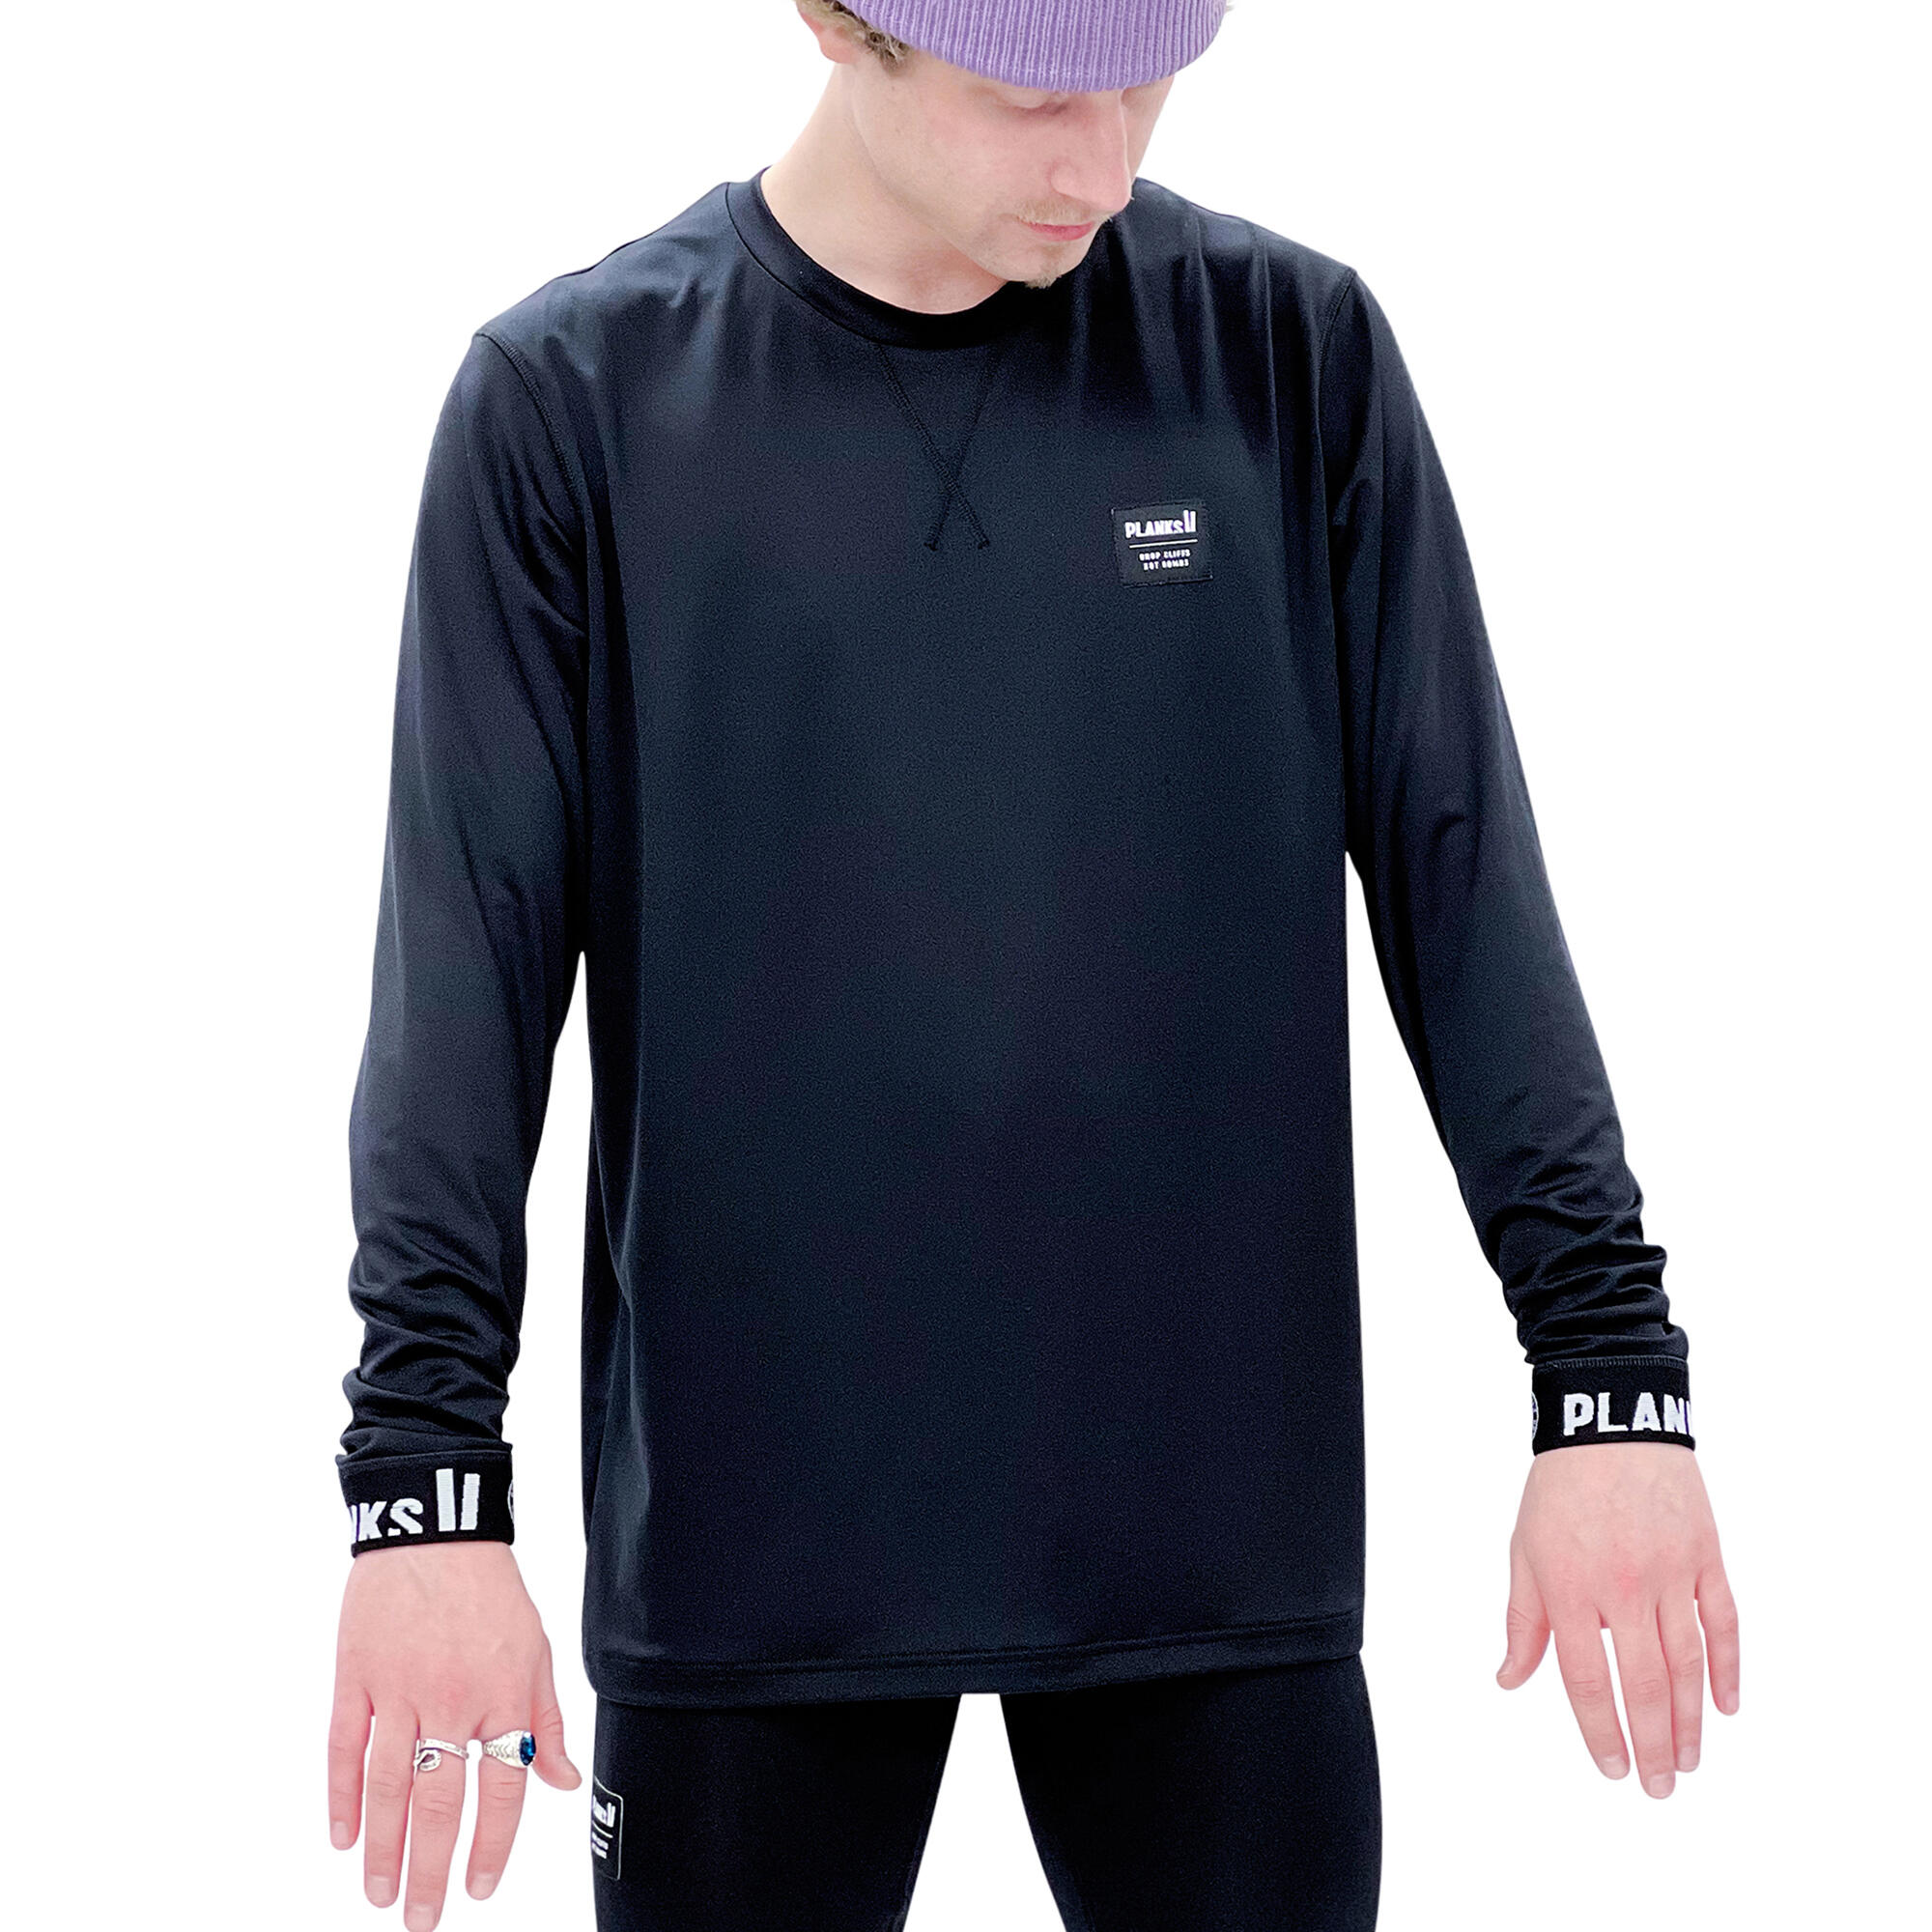 PLANKS Planks Men's Fall-Line Base Layer Top in Black - Long Sleeve Fitness T-Shirt